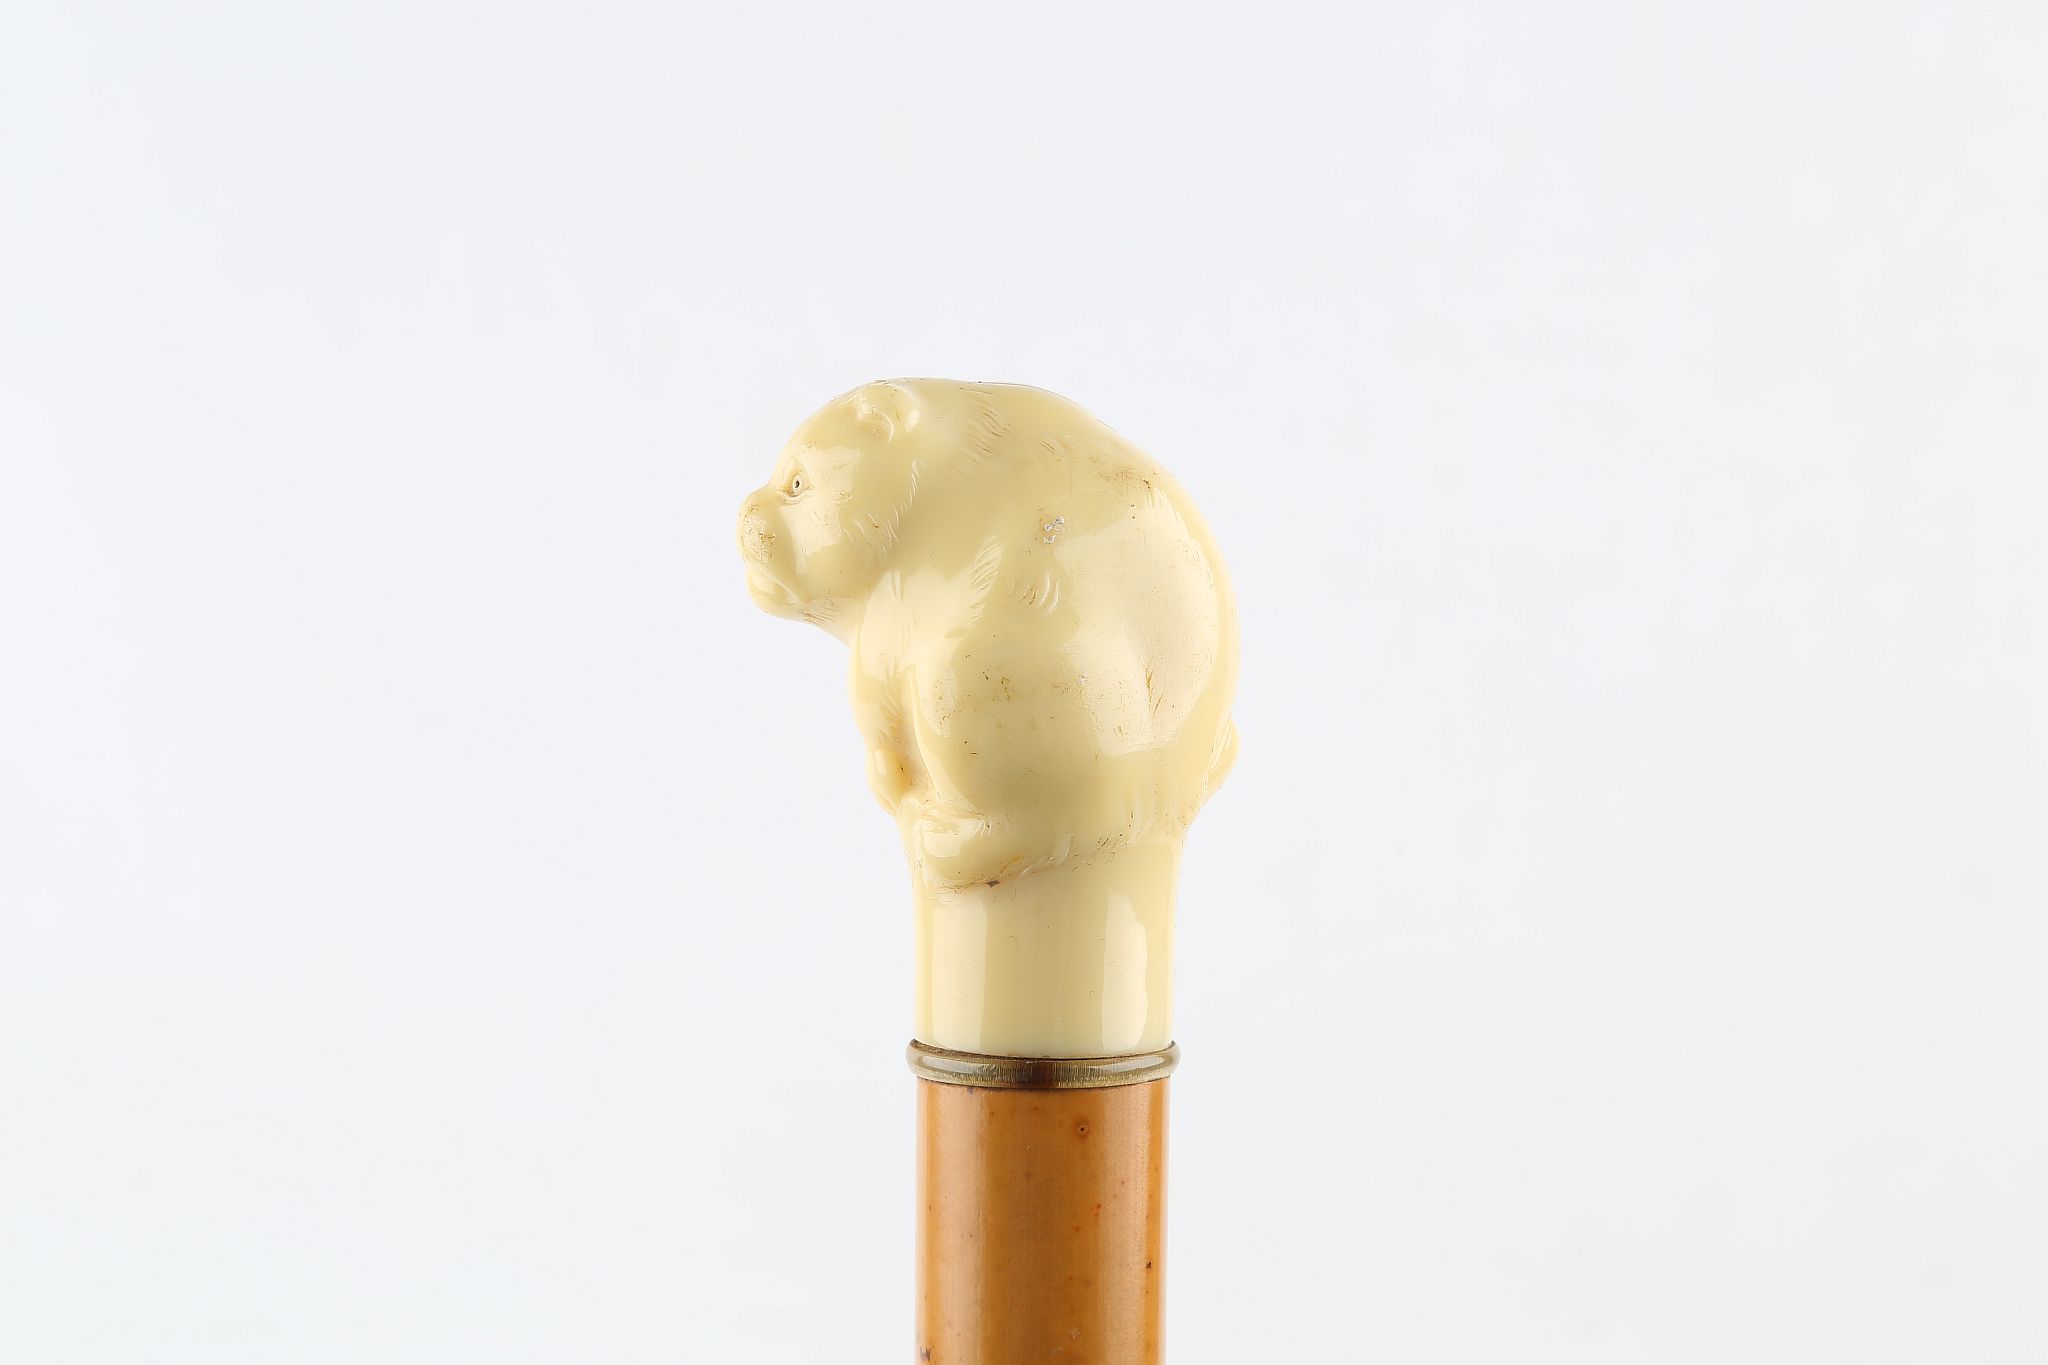 AN EARLY 20TH CENTURY WALKING CANE WITH EARLY CELLULOID HANDLE, in the form of a bear, mounted on - Image 4 of 6